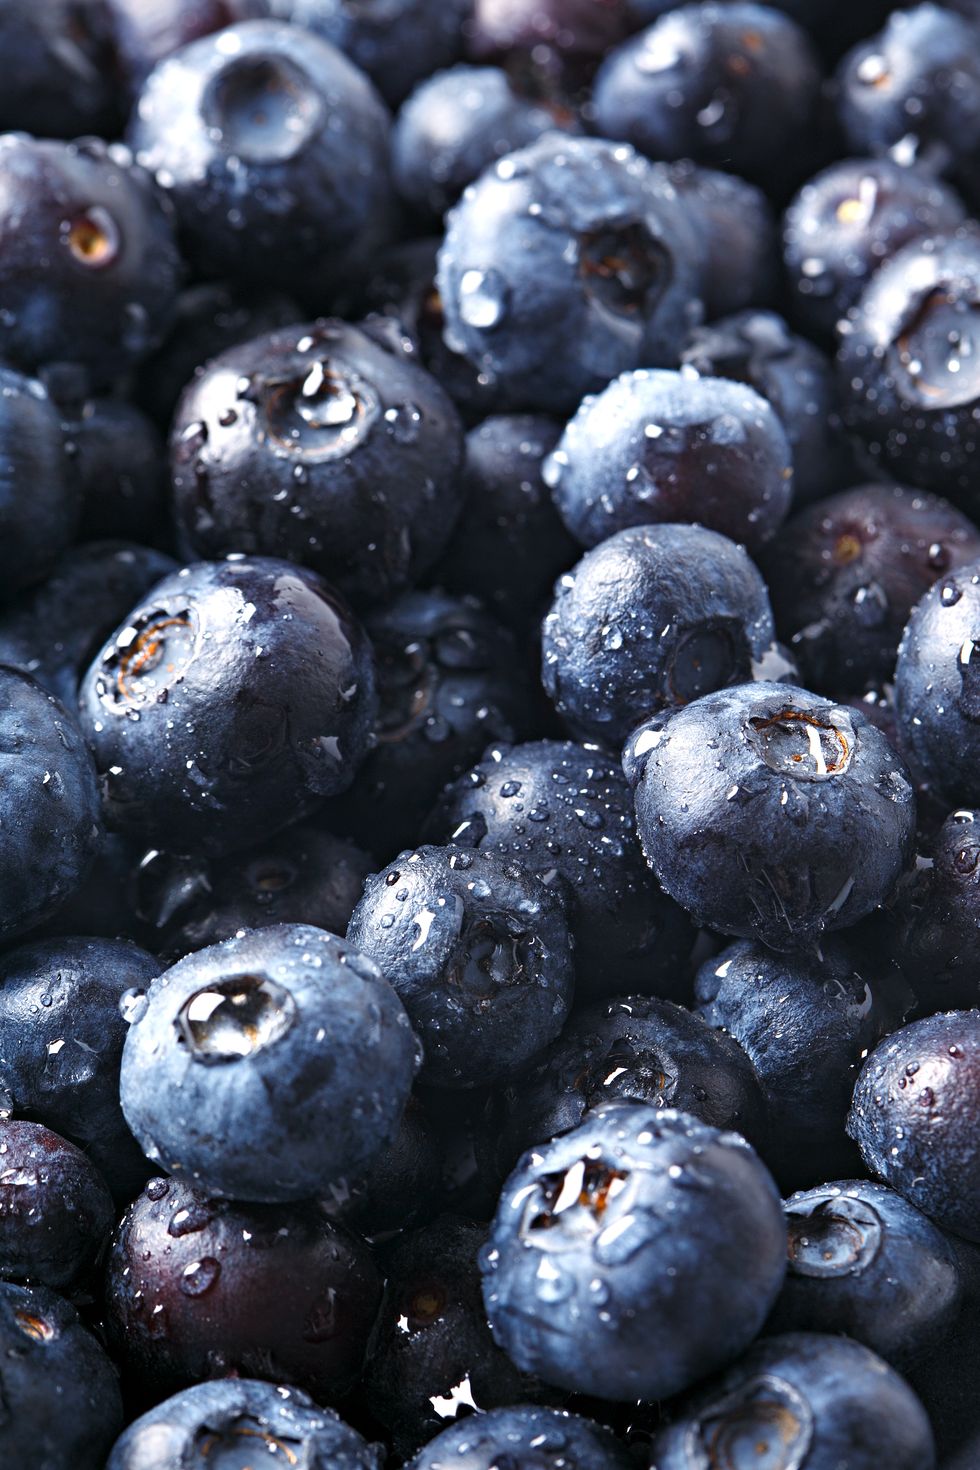 Bilberry, Fruit, Berry, Natural foods, Superfood, Blueberry, Huckleberry, Food, Plant, Seedless fruit, 